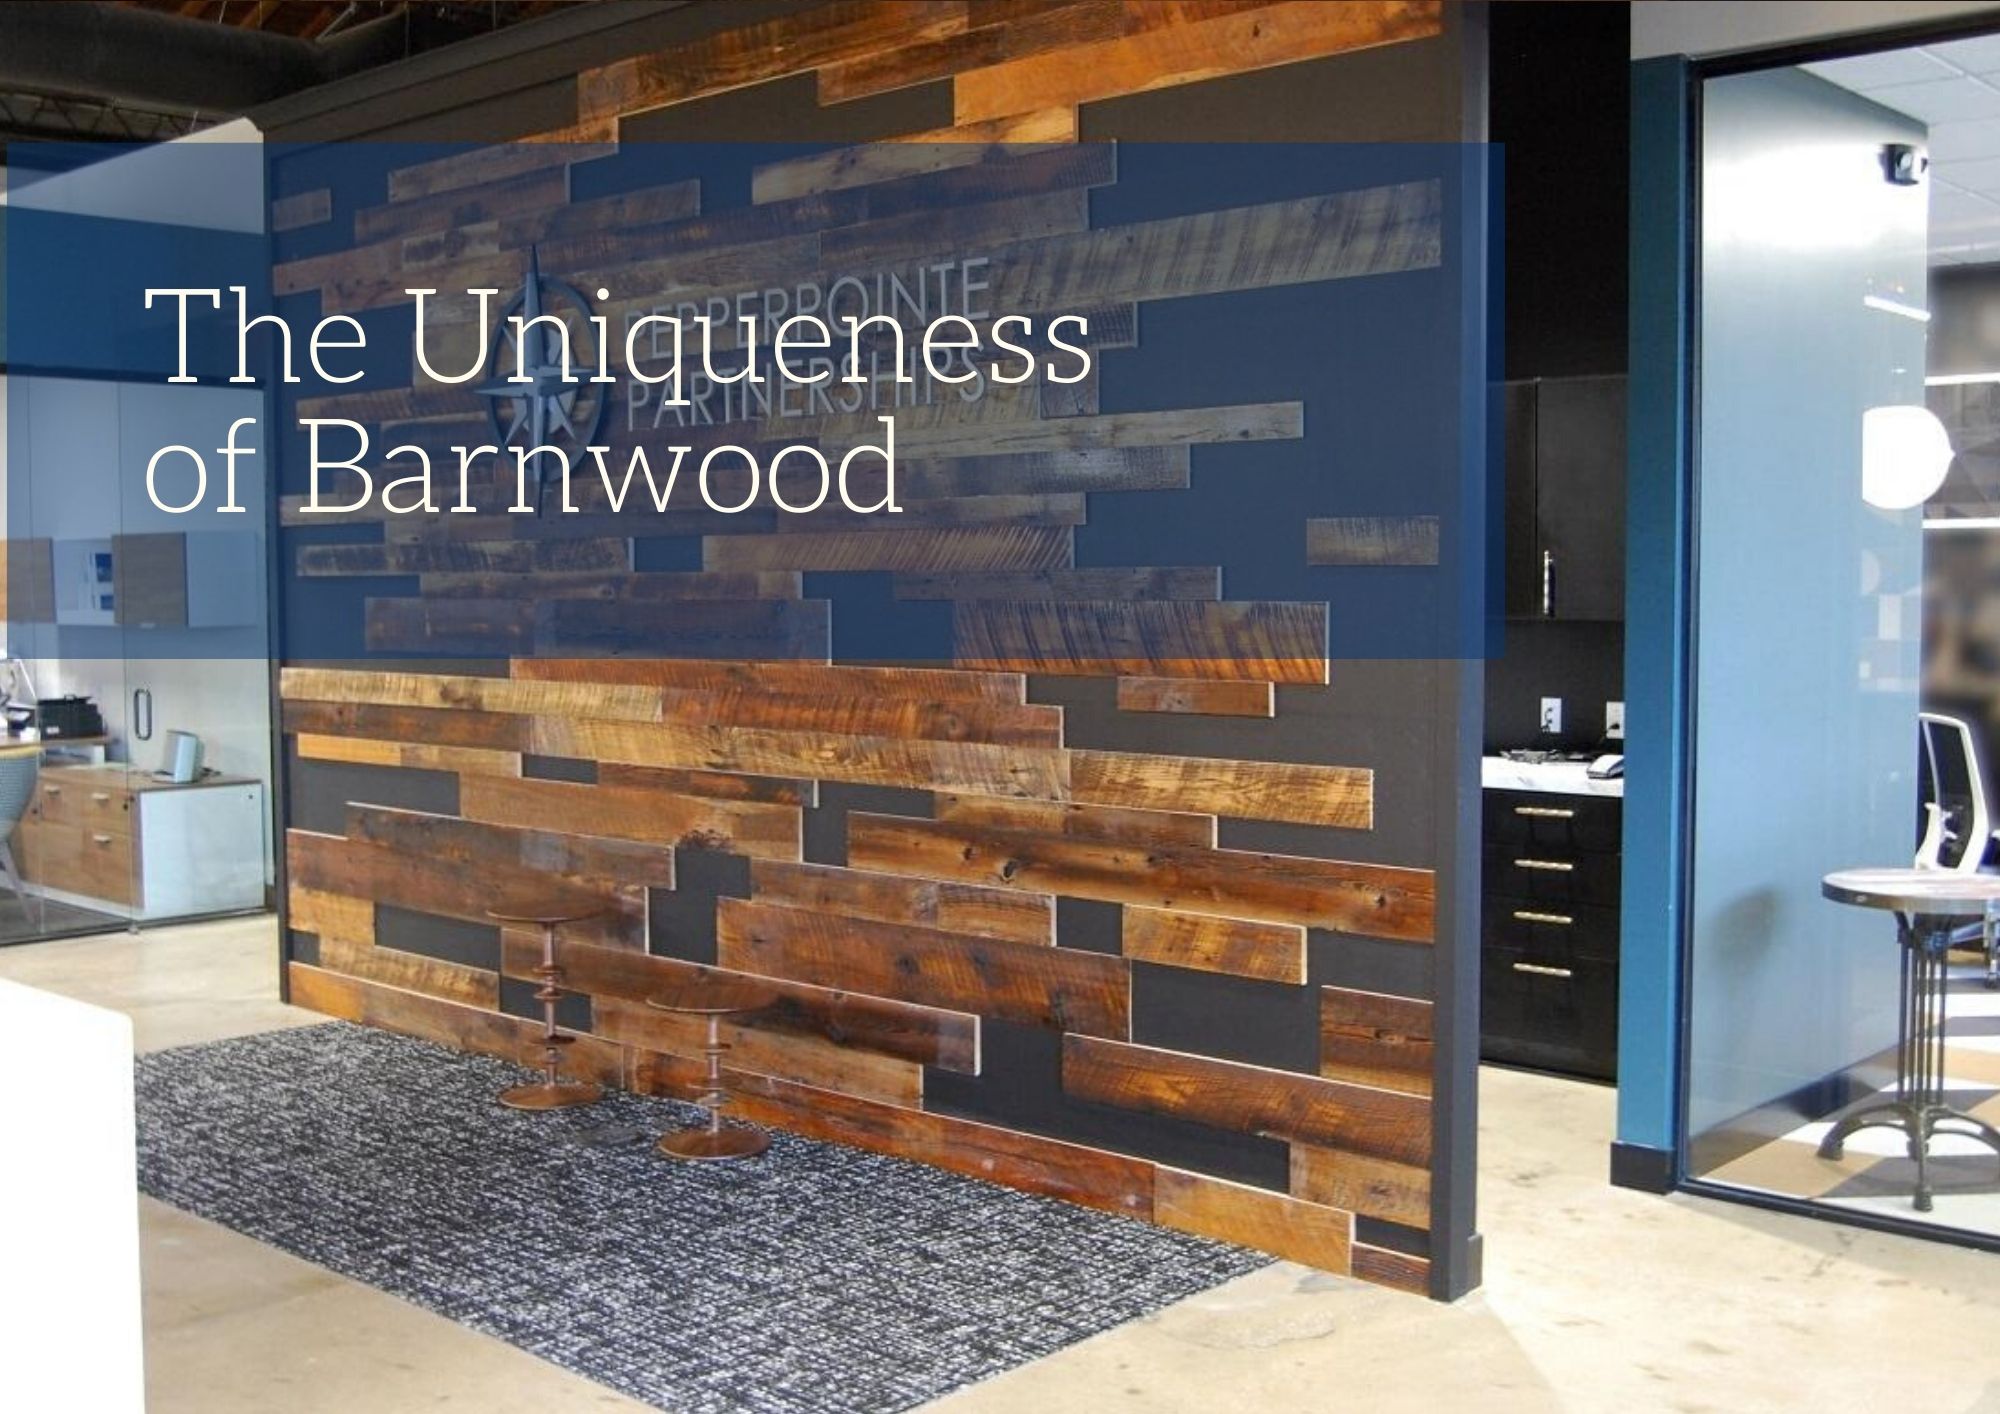 The Uniqueness of Barnwood